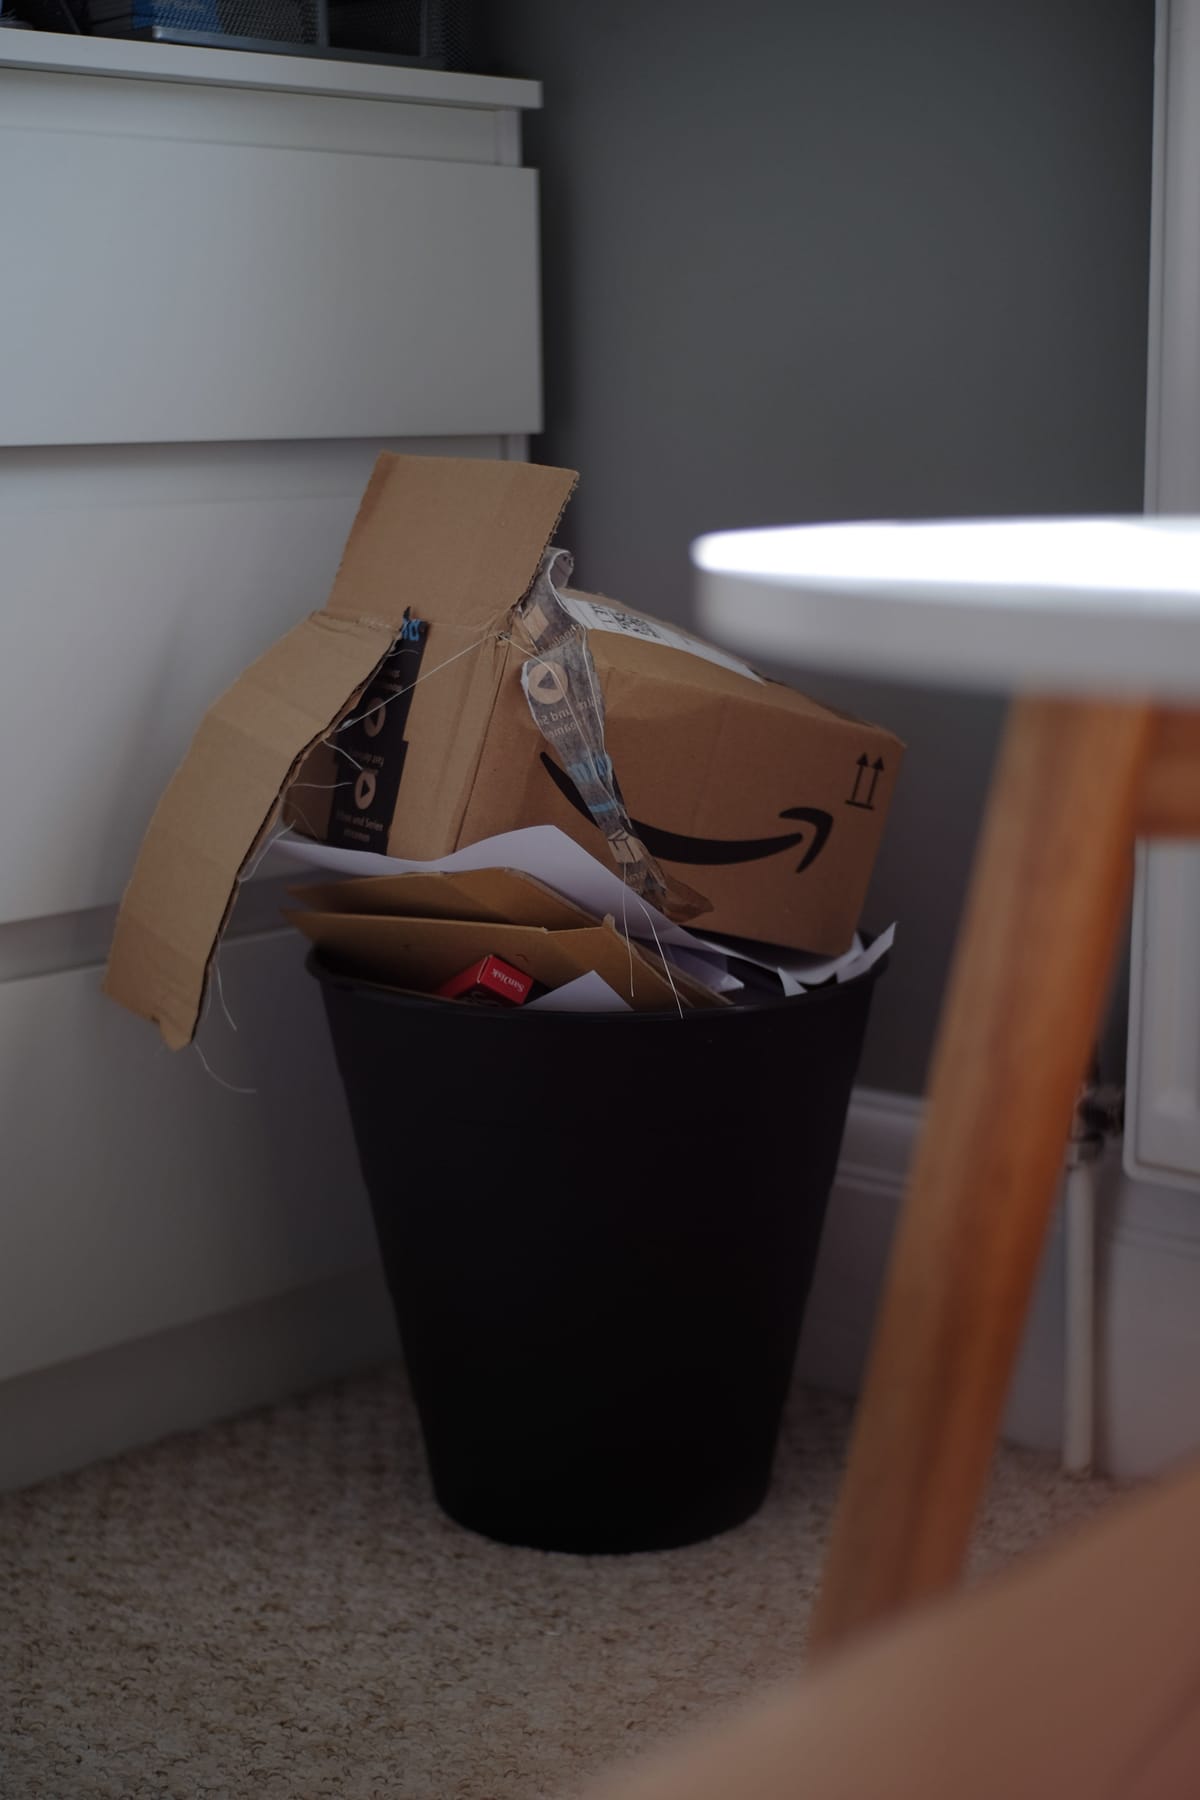 Amazon gets busted